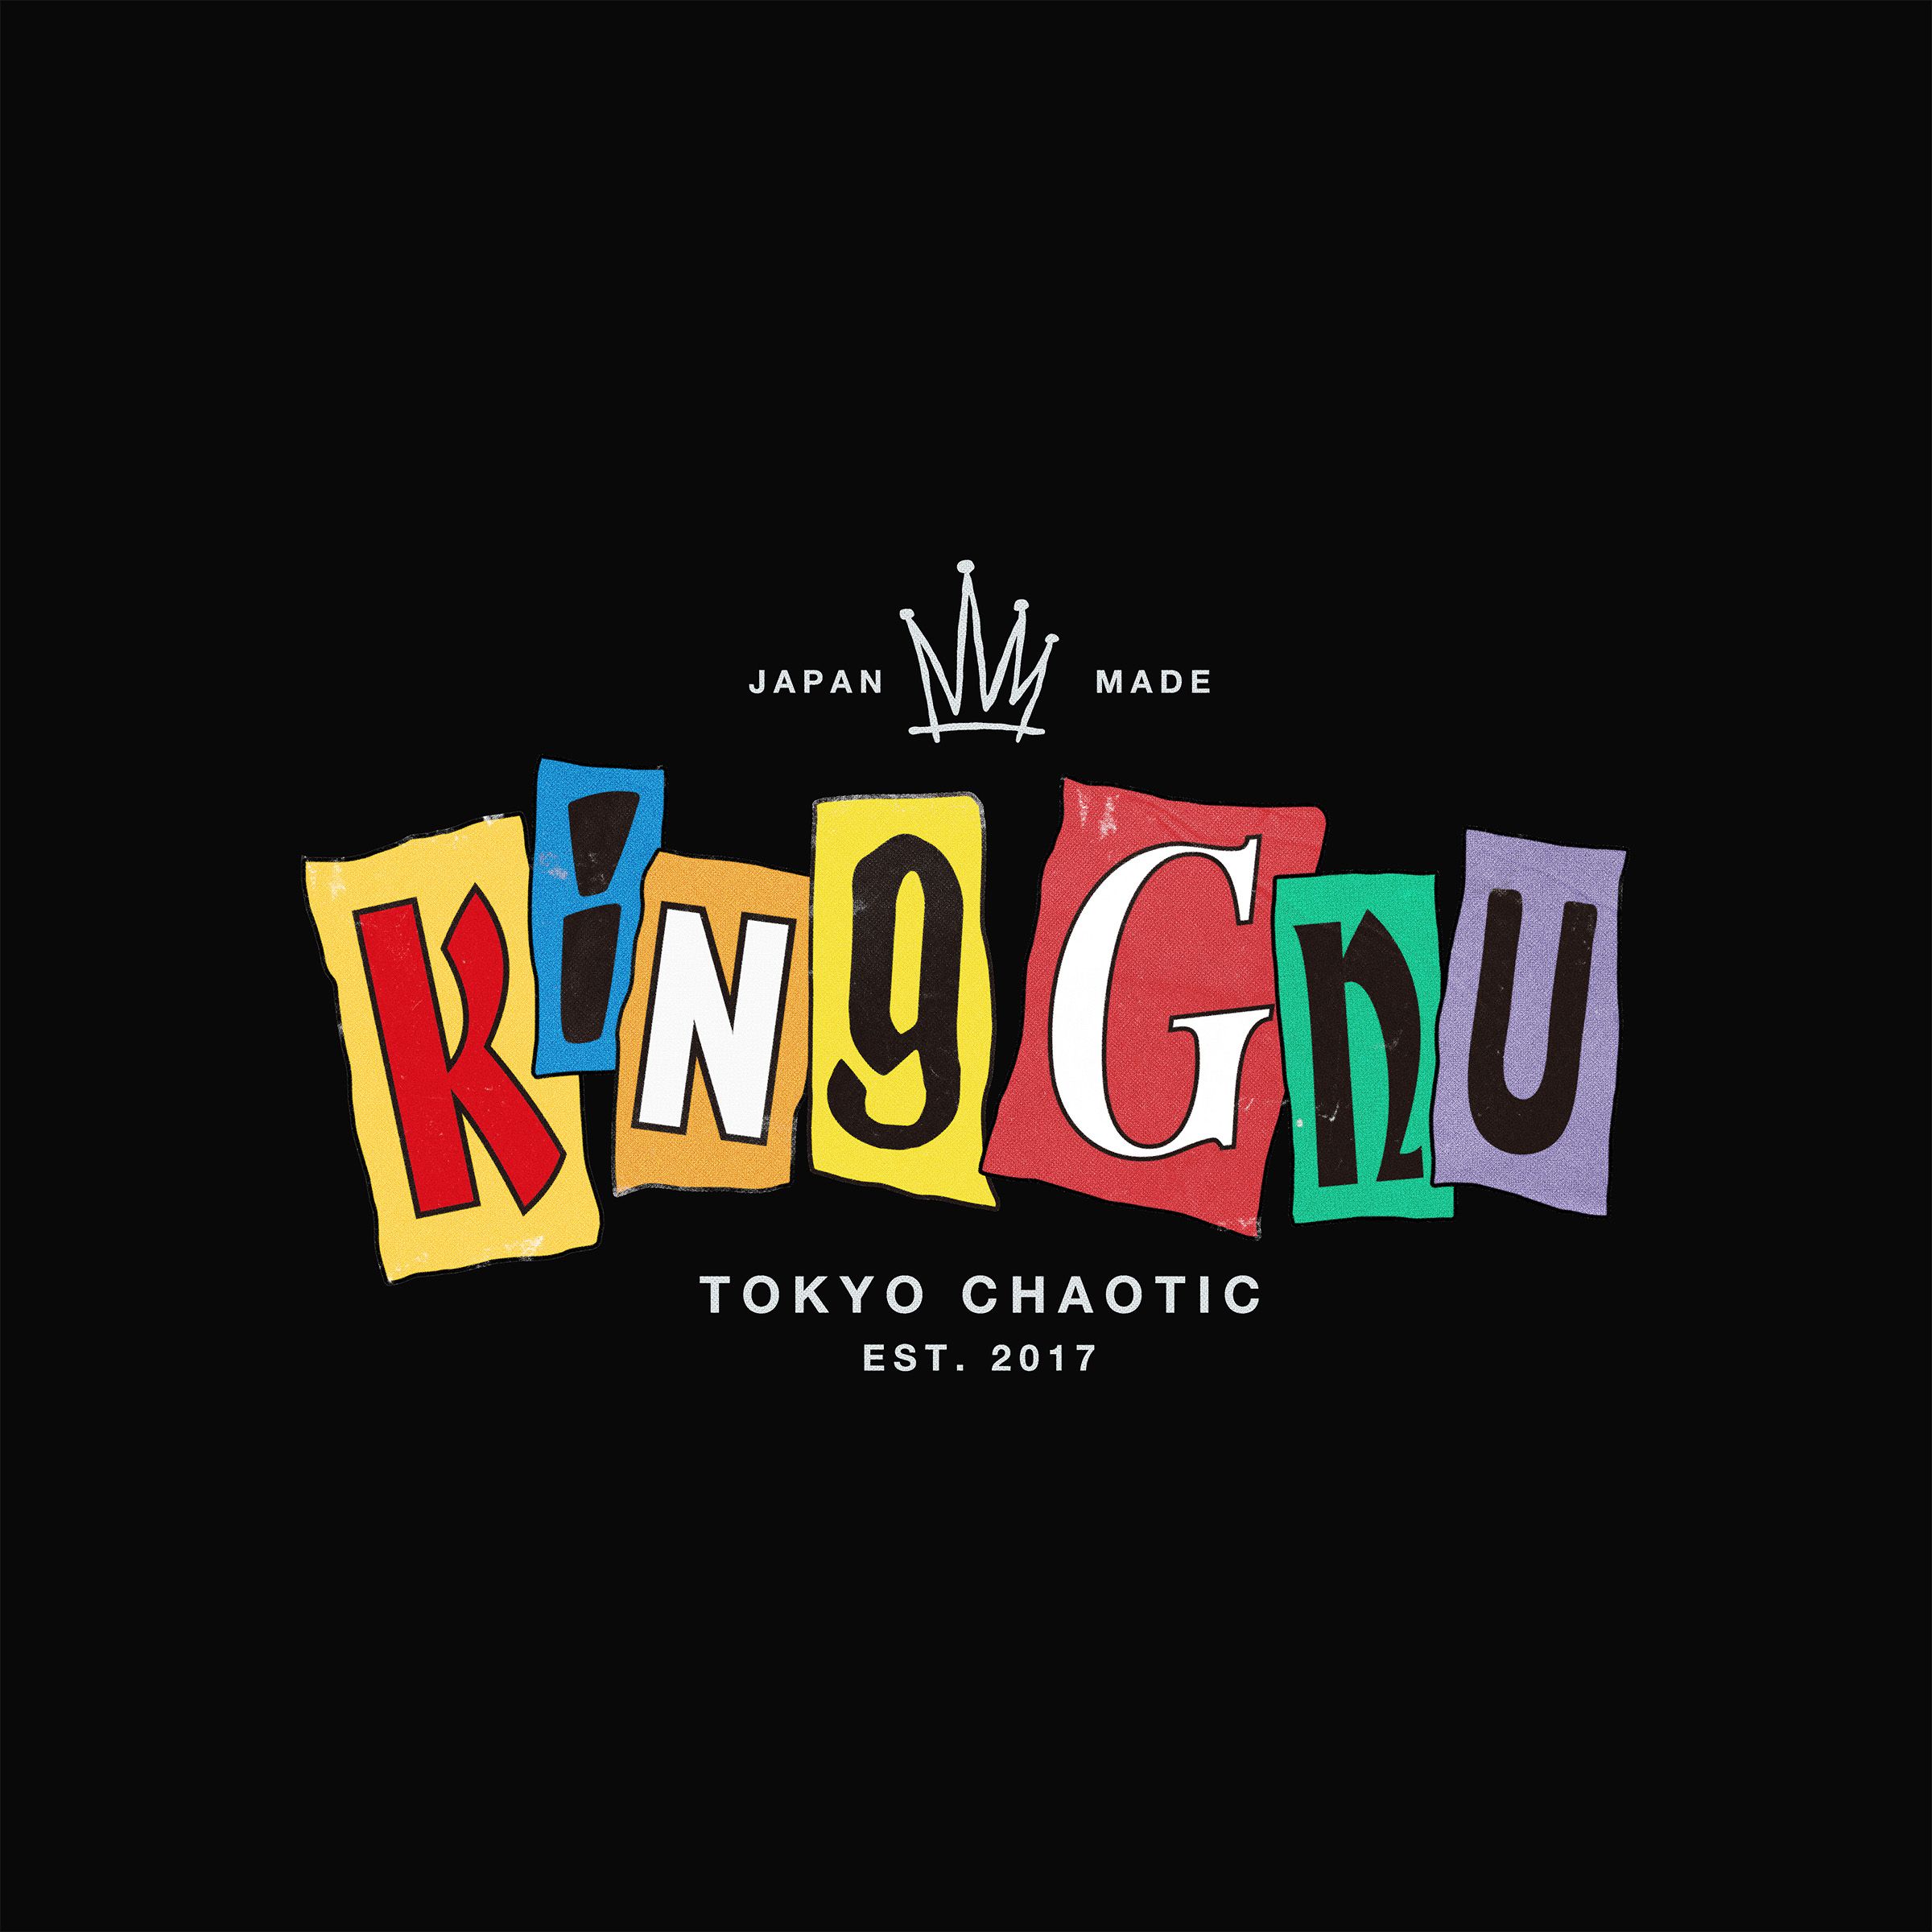 King Gnu初のアジアツアーの開催が決定！King Gnu First Asian Tour to 